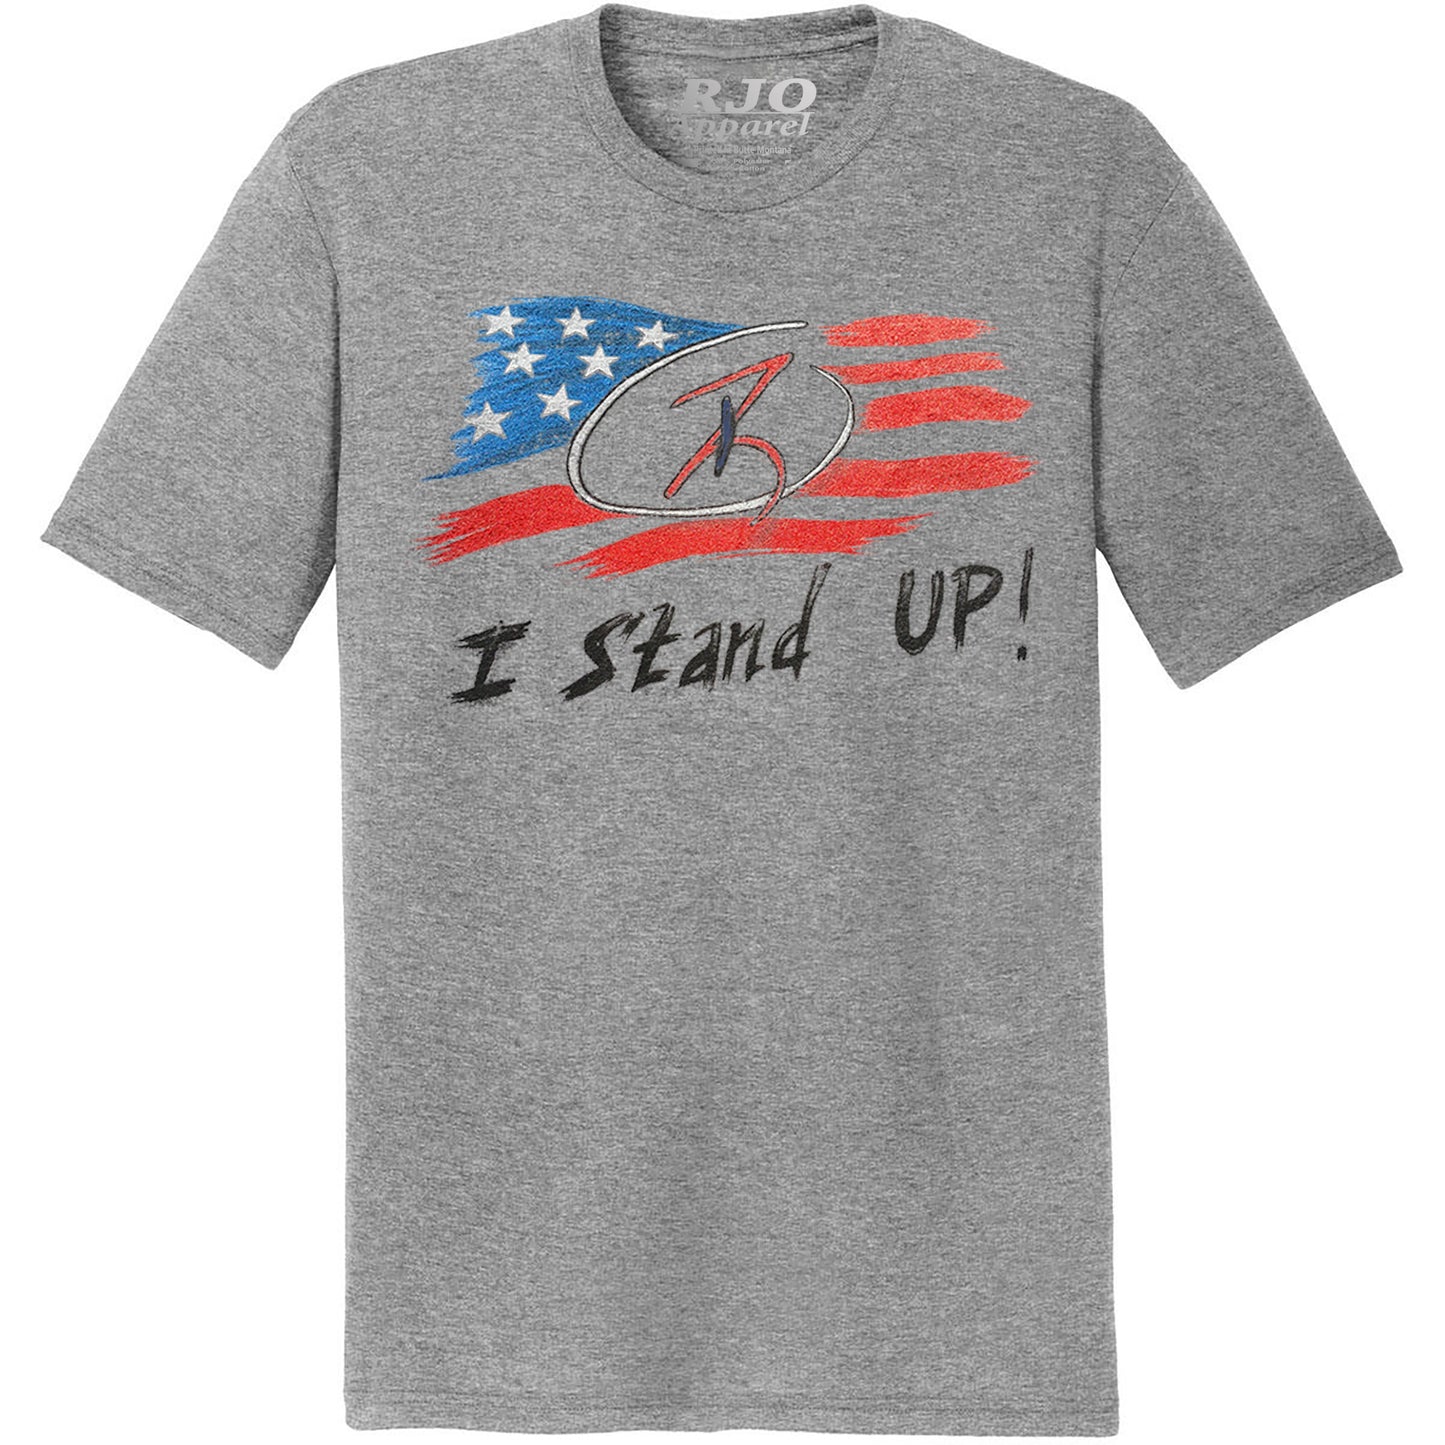 I stand up printed American flag gray women's tee RJO